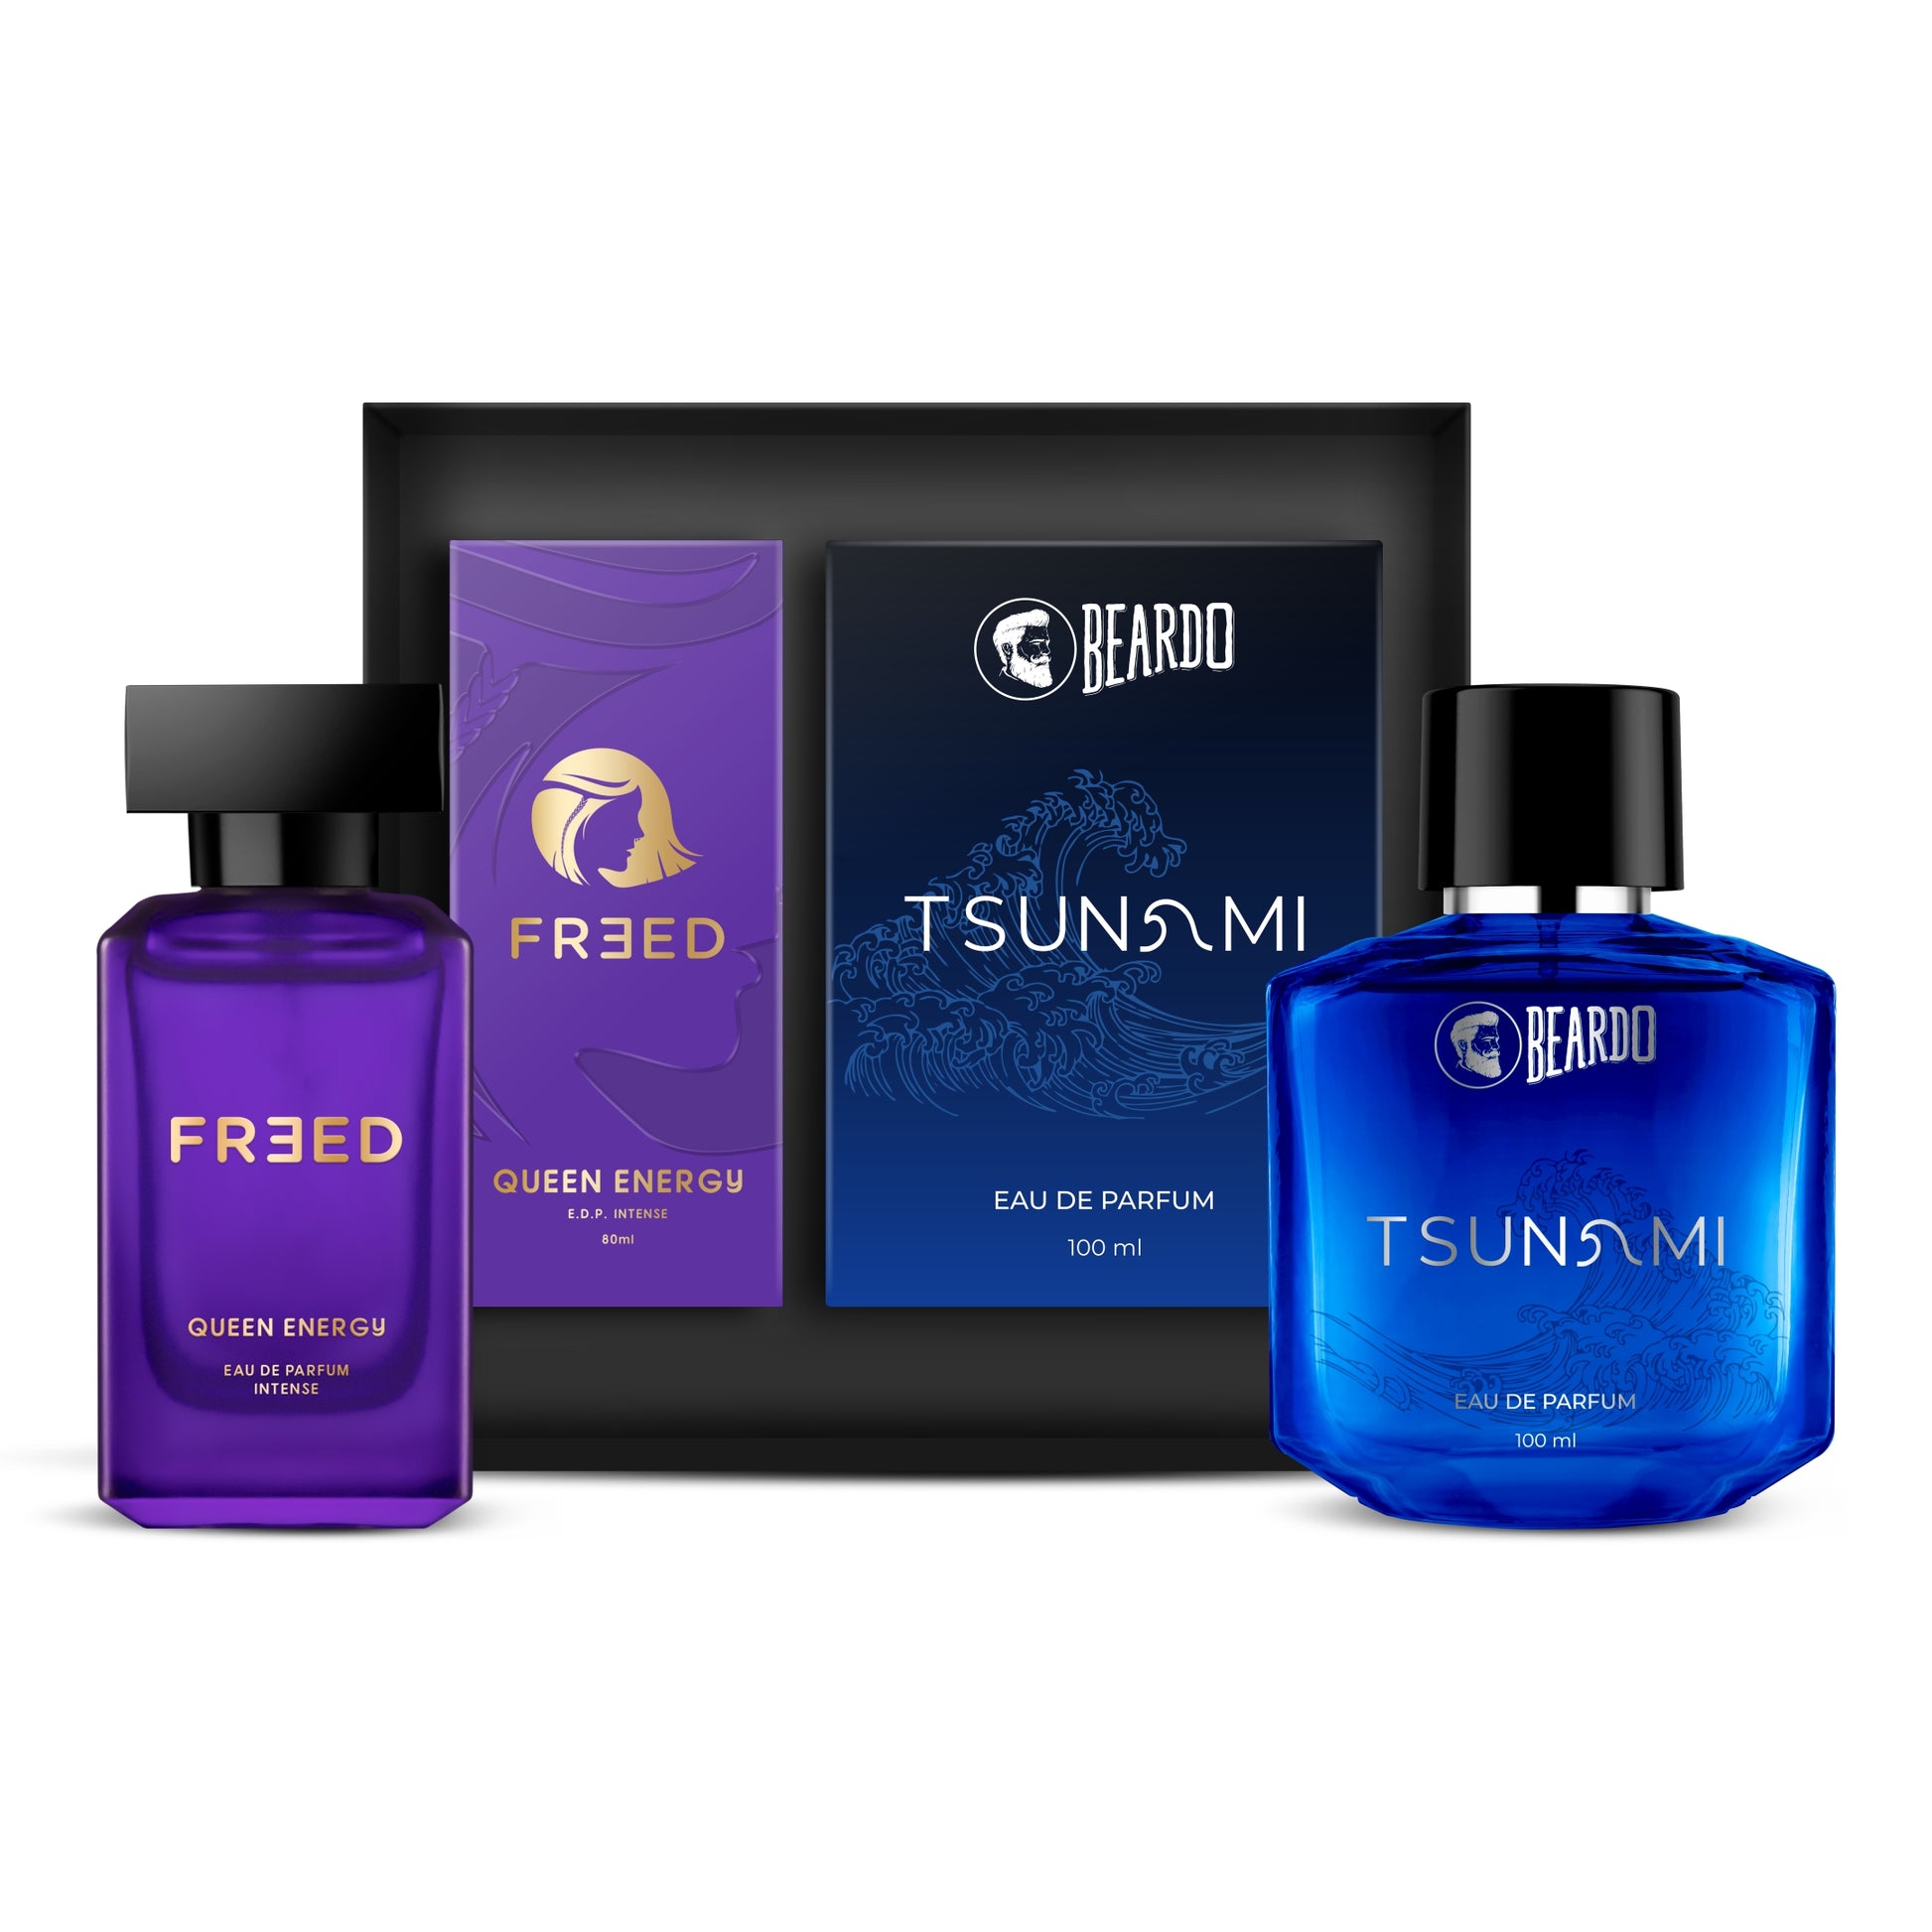 Beardo & Freed Majestic Duo Gift Set (For Him & Her)